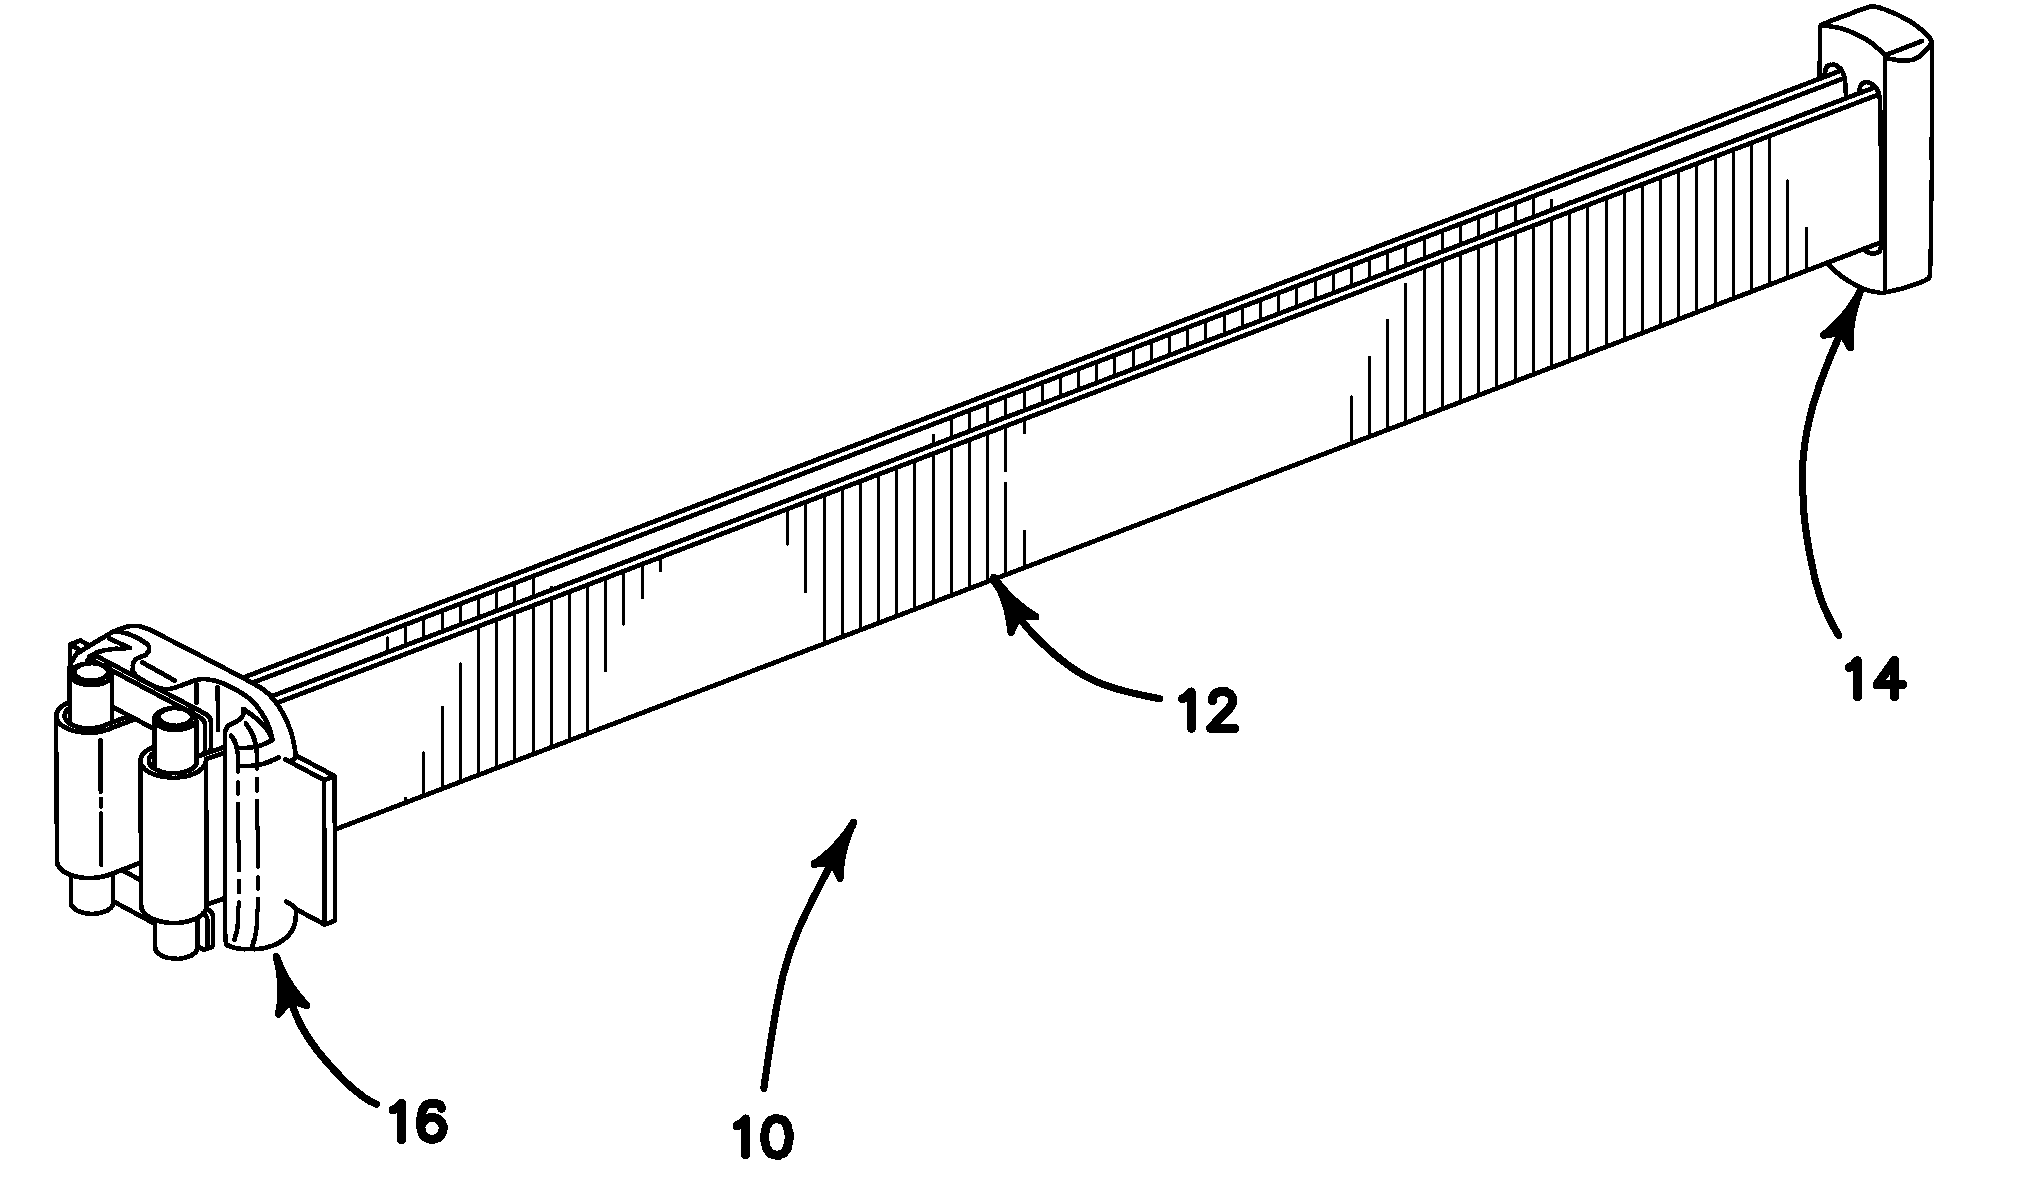 Implant device and system for stabilized fixation of bone and soft tissue